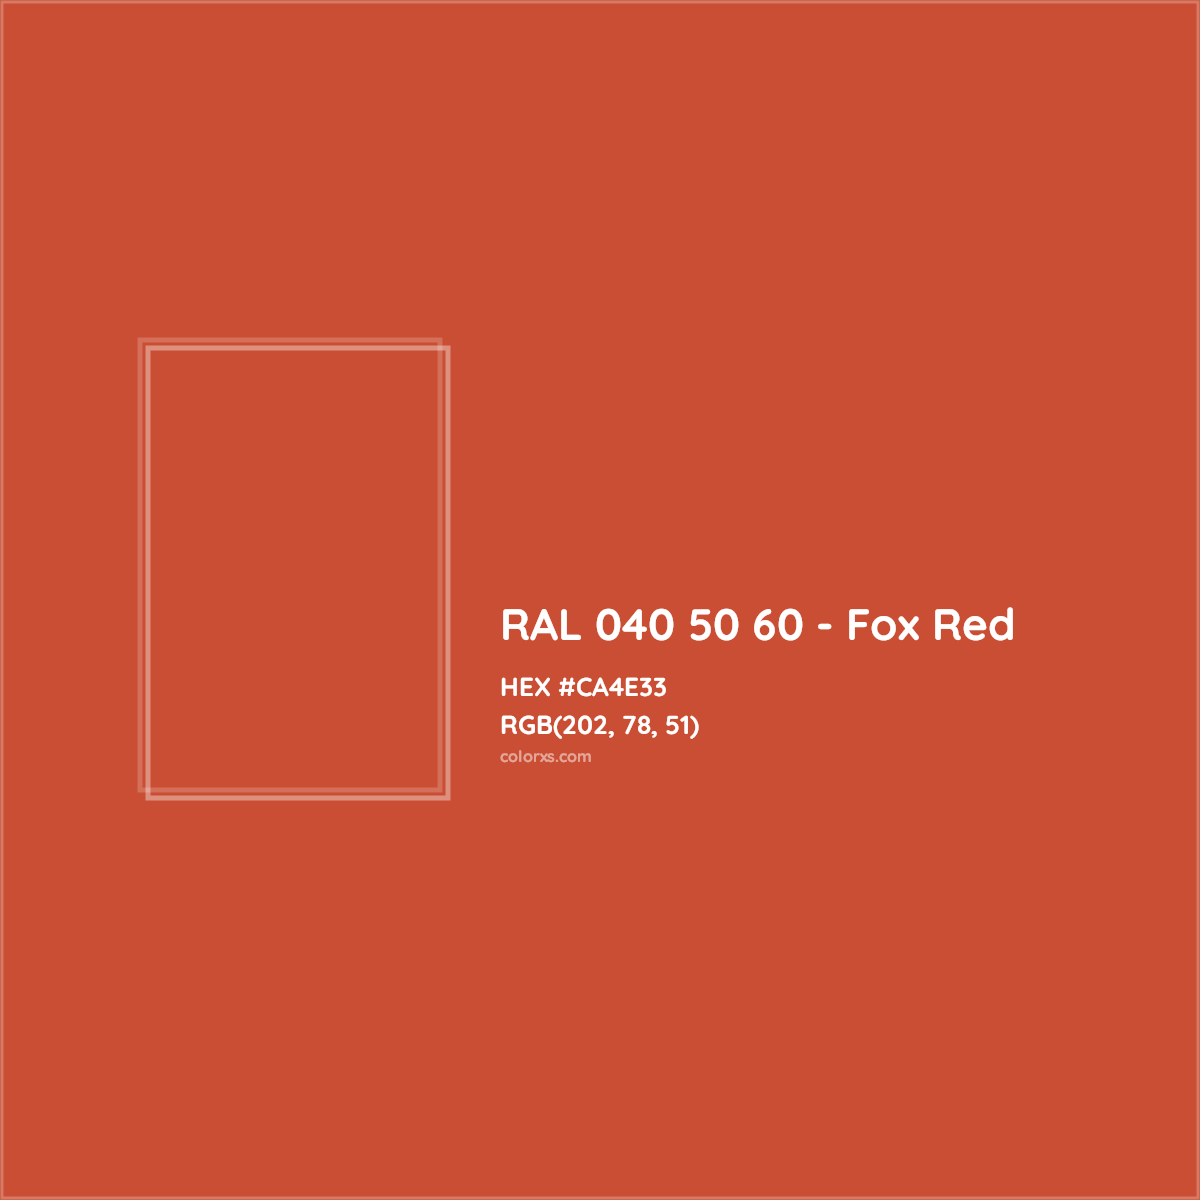 HEX #CA4E33 RAL 040 50 60 - Fox Red CMS RAL Design - Color Code